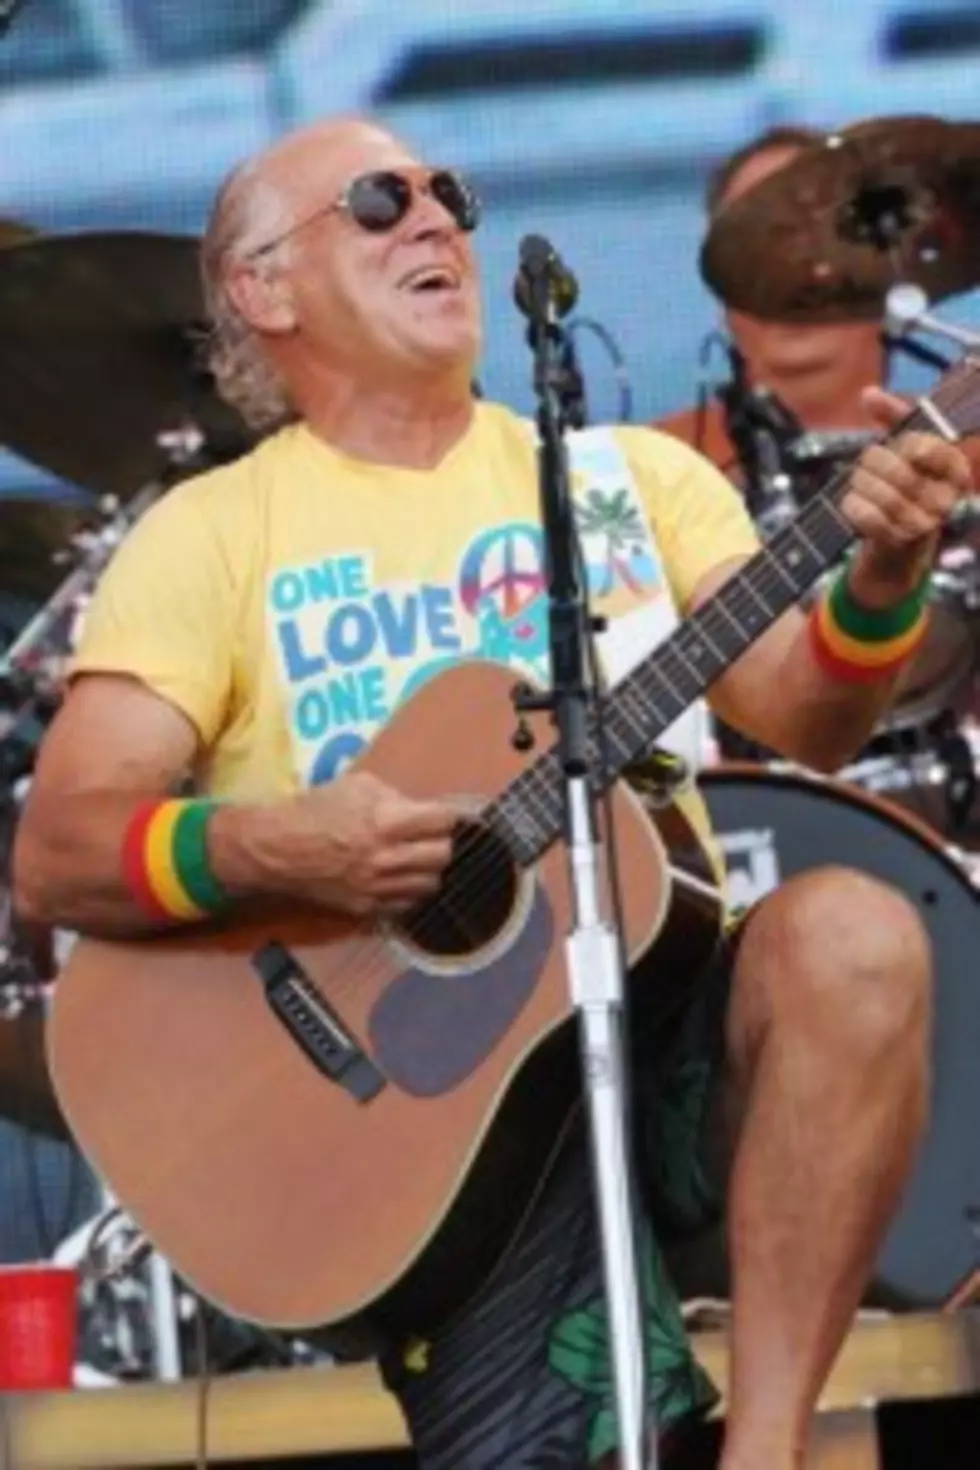 Jimmy Buffett Hospitalized After Fall From Stage